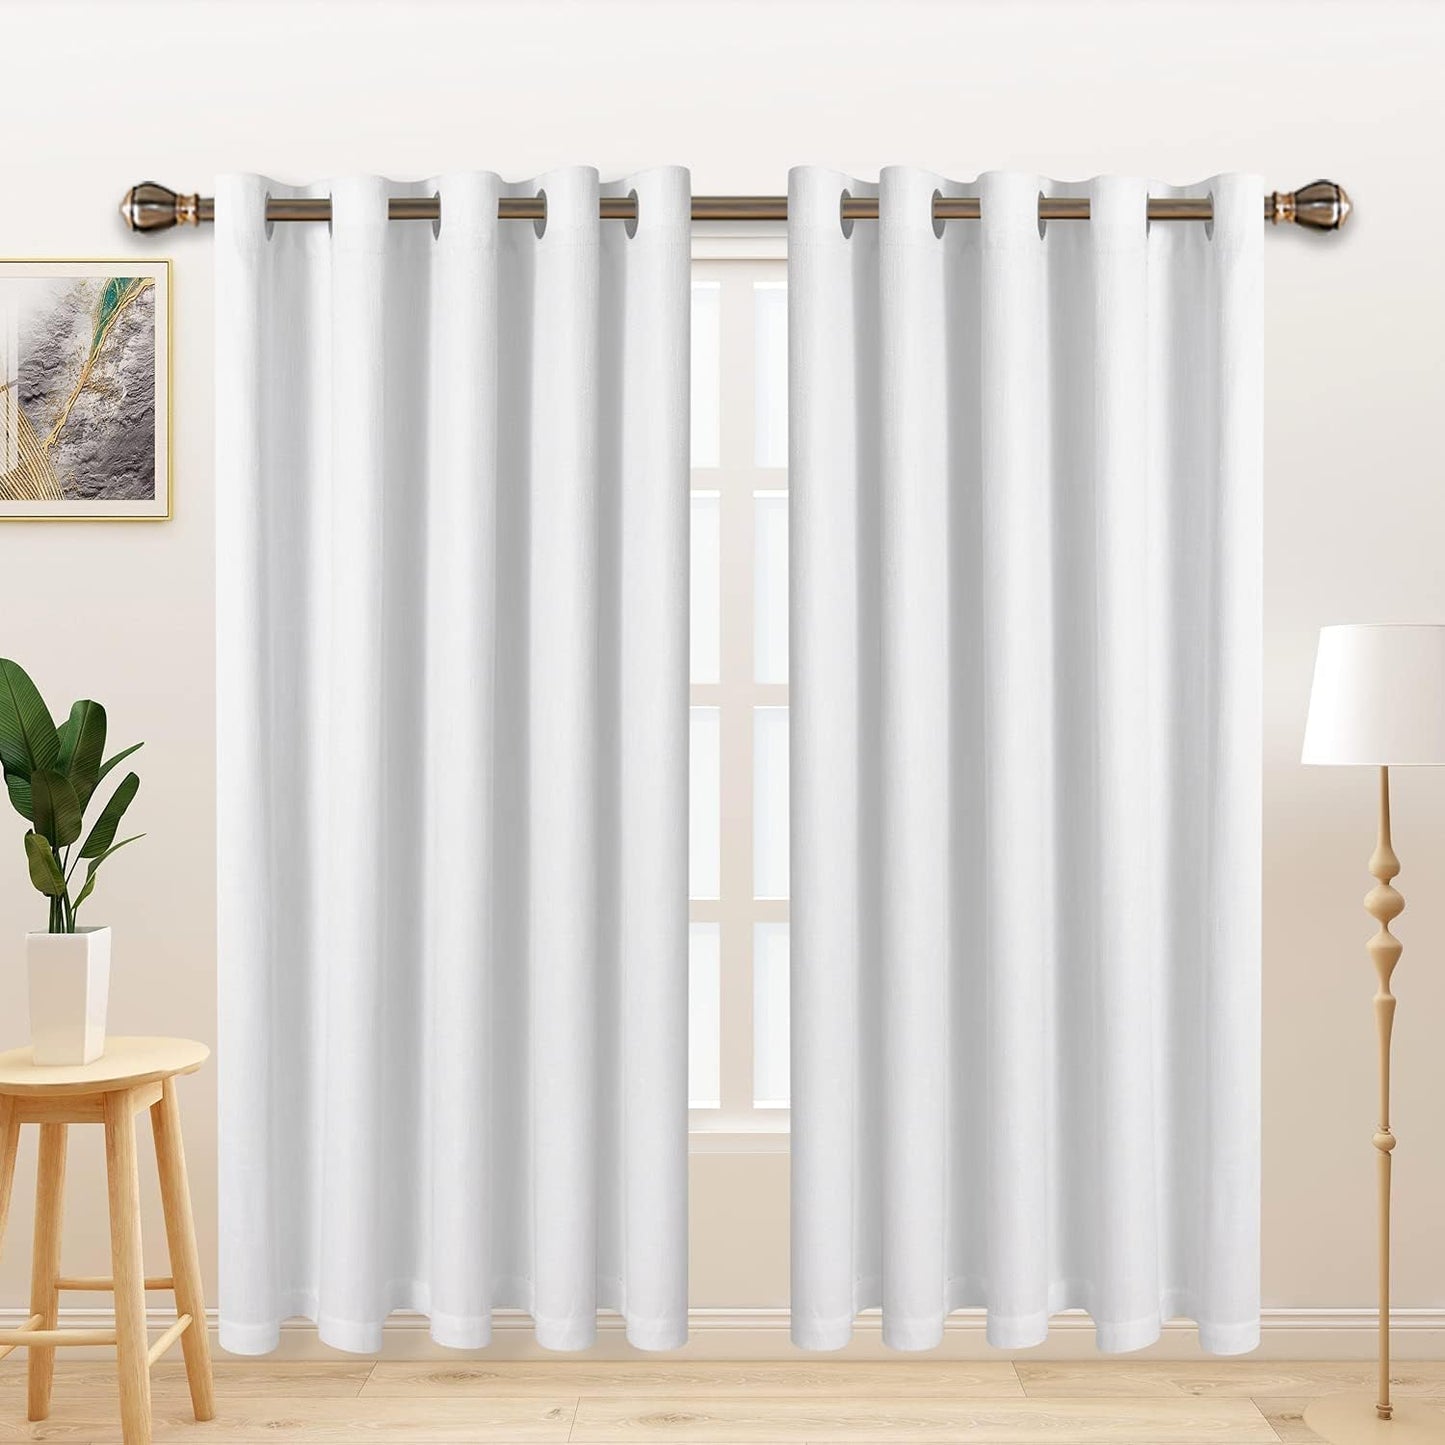 LORDTEX Linen Look Textured Blackout Curtains with Thermal Insulated Liner - Heavy Thick Grommet Window Drapes for Bedroom, 50 X 84 Inches, Ivory, Set of 2 Panels  LORDTEX Pure White 70 X 84 Inches 